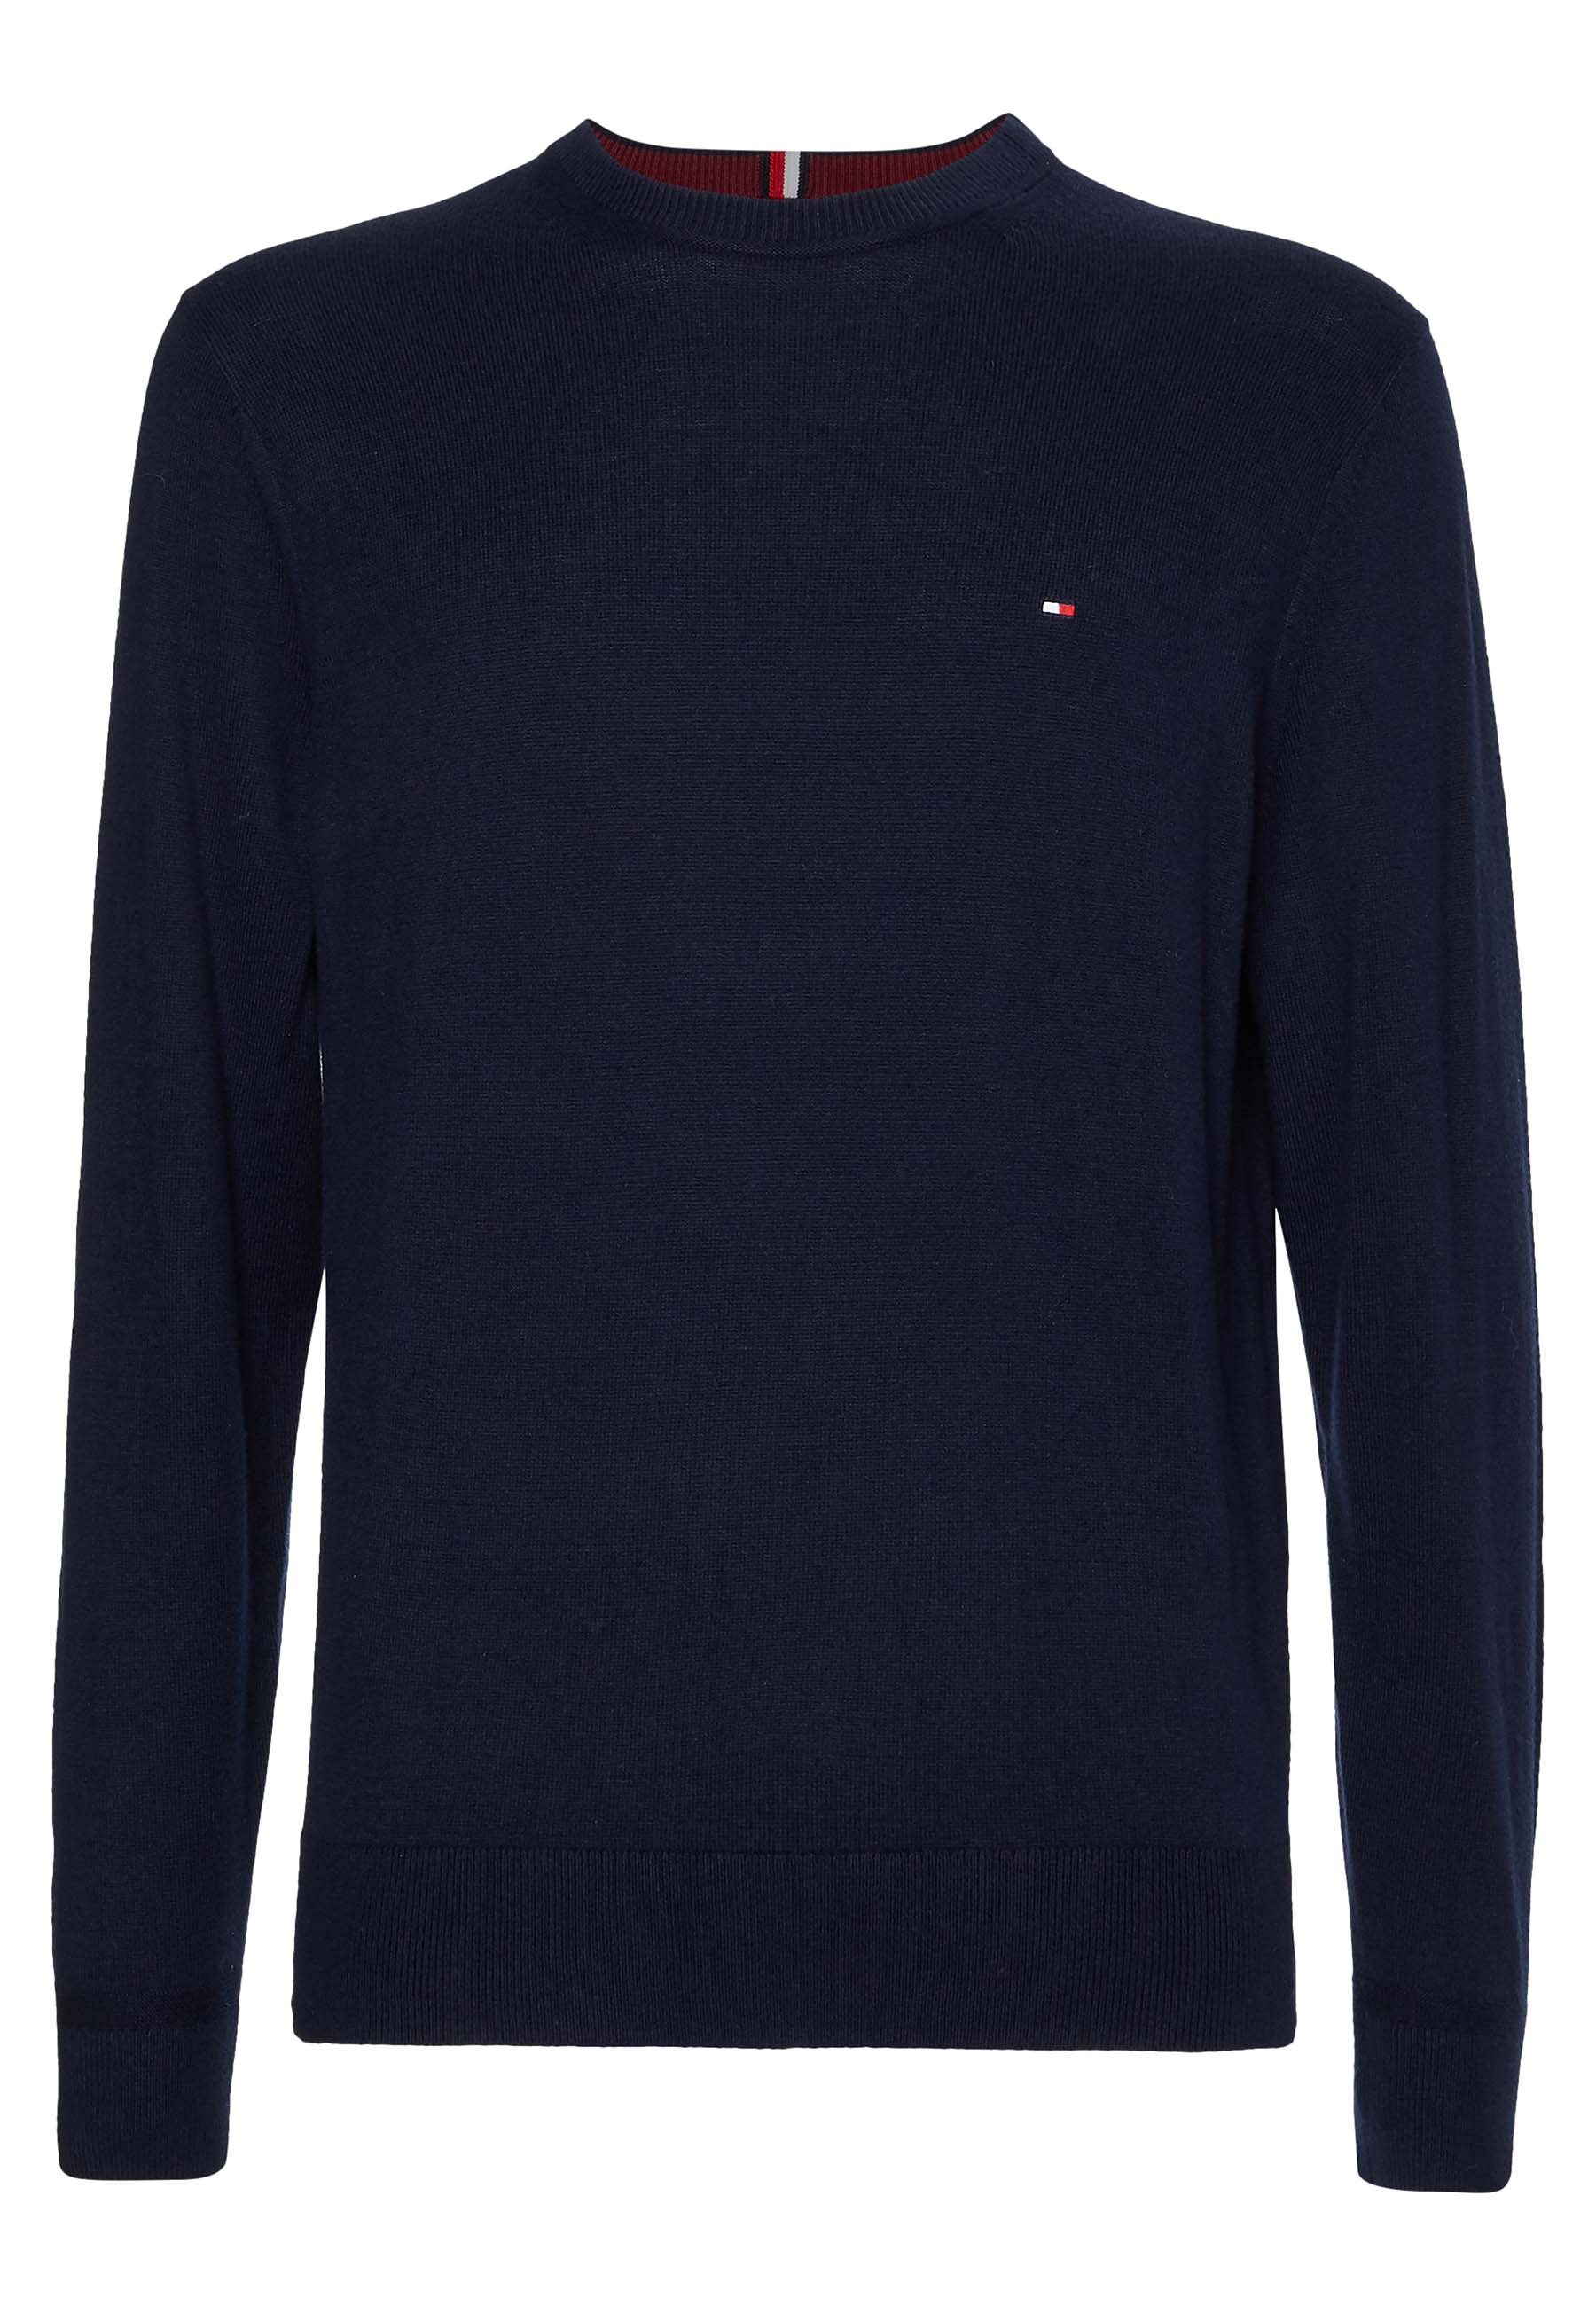 Tommy Hilfiger pullovers donkerblauw Heren maat M